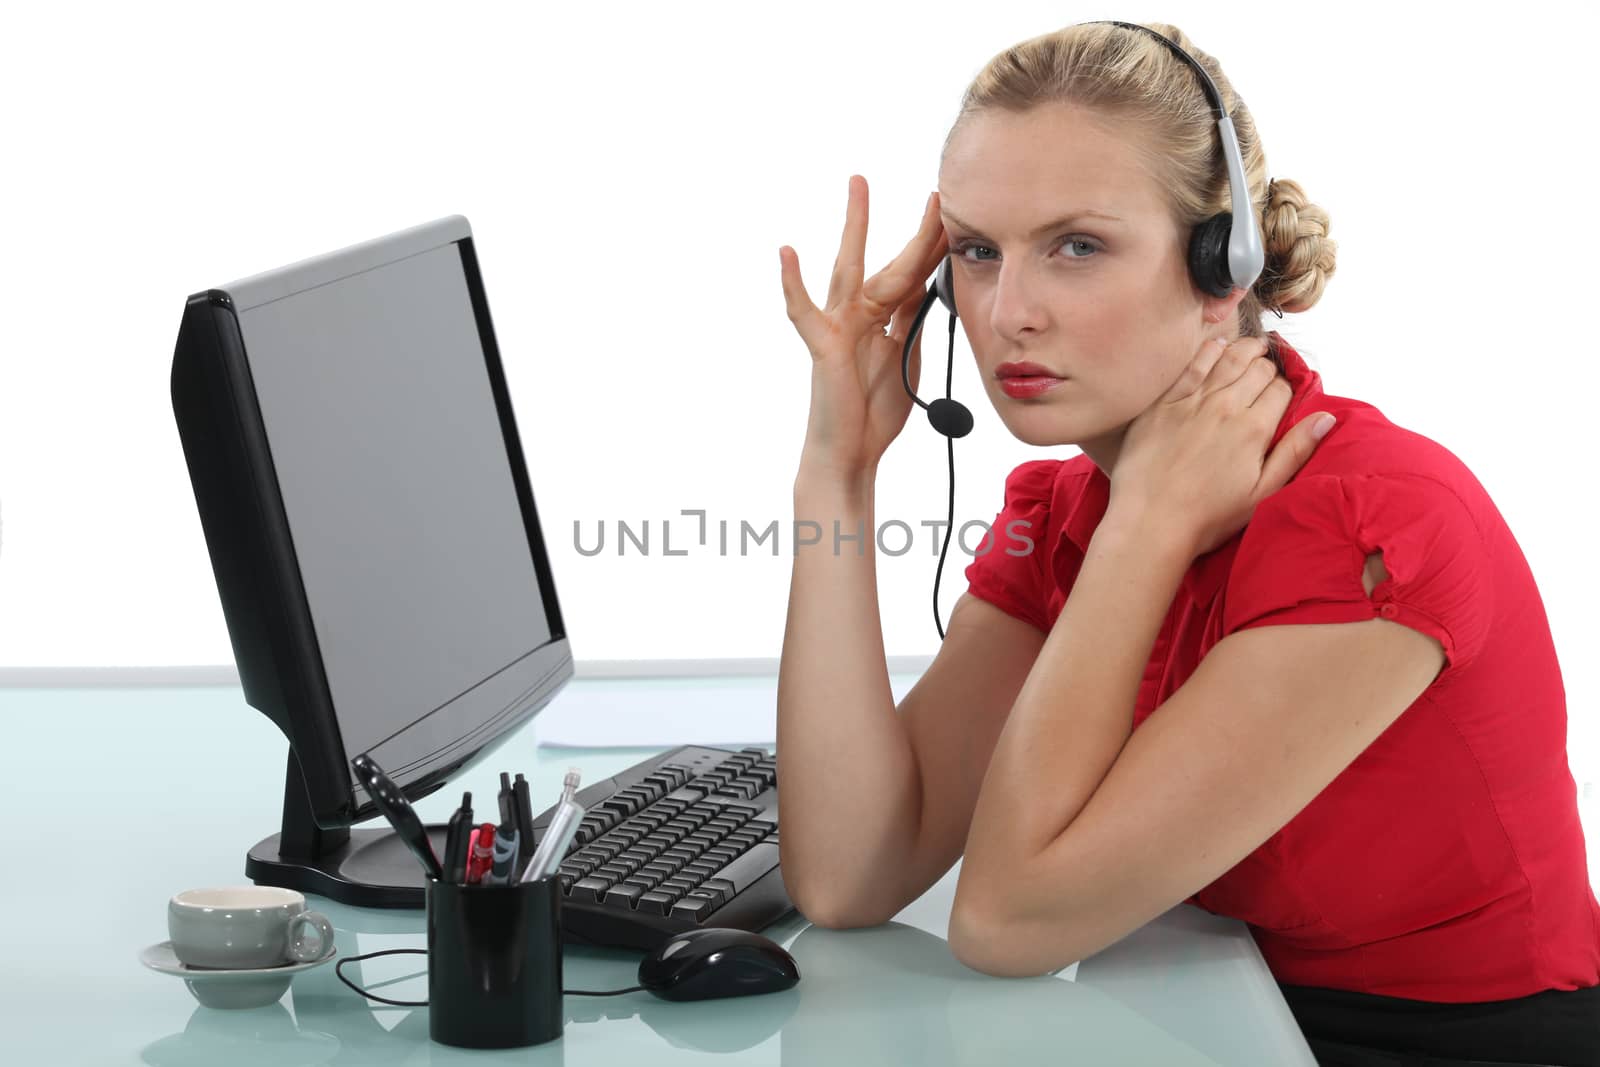 Stressed call-center worker by phovoir